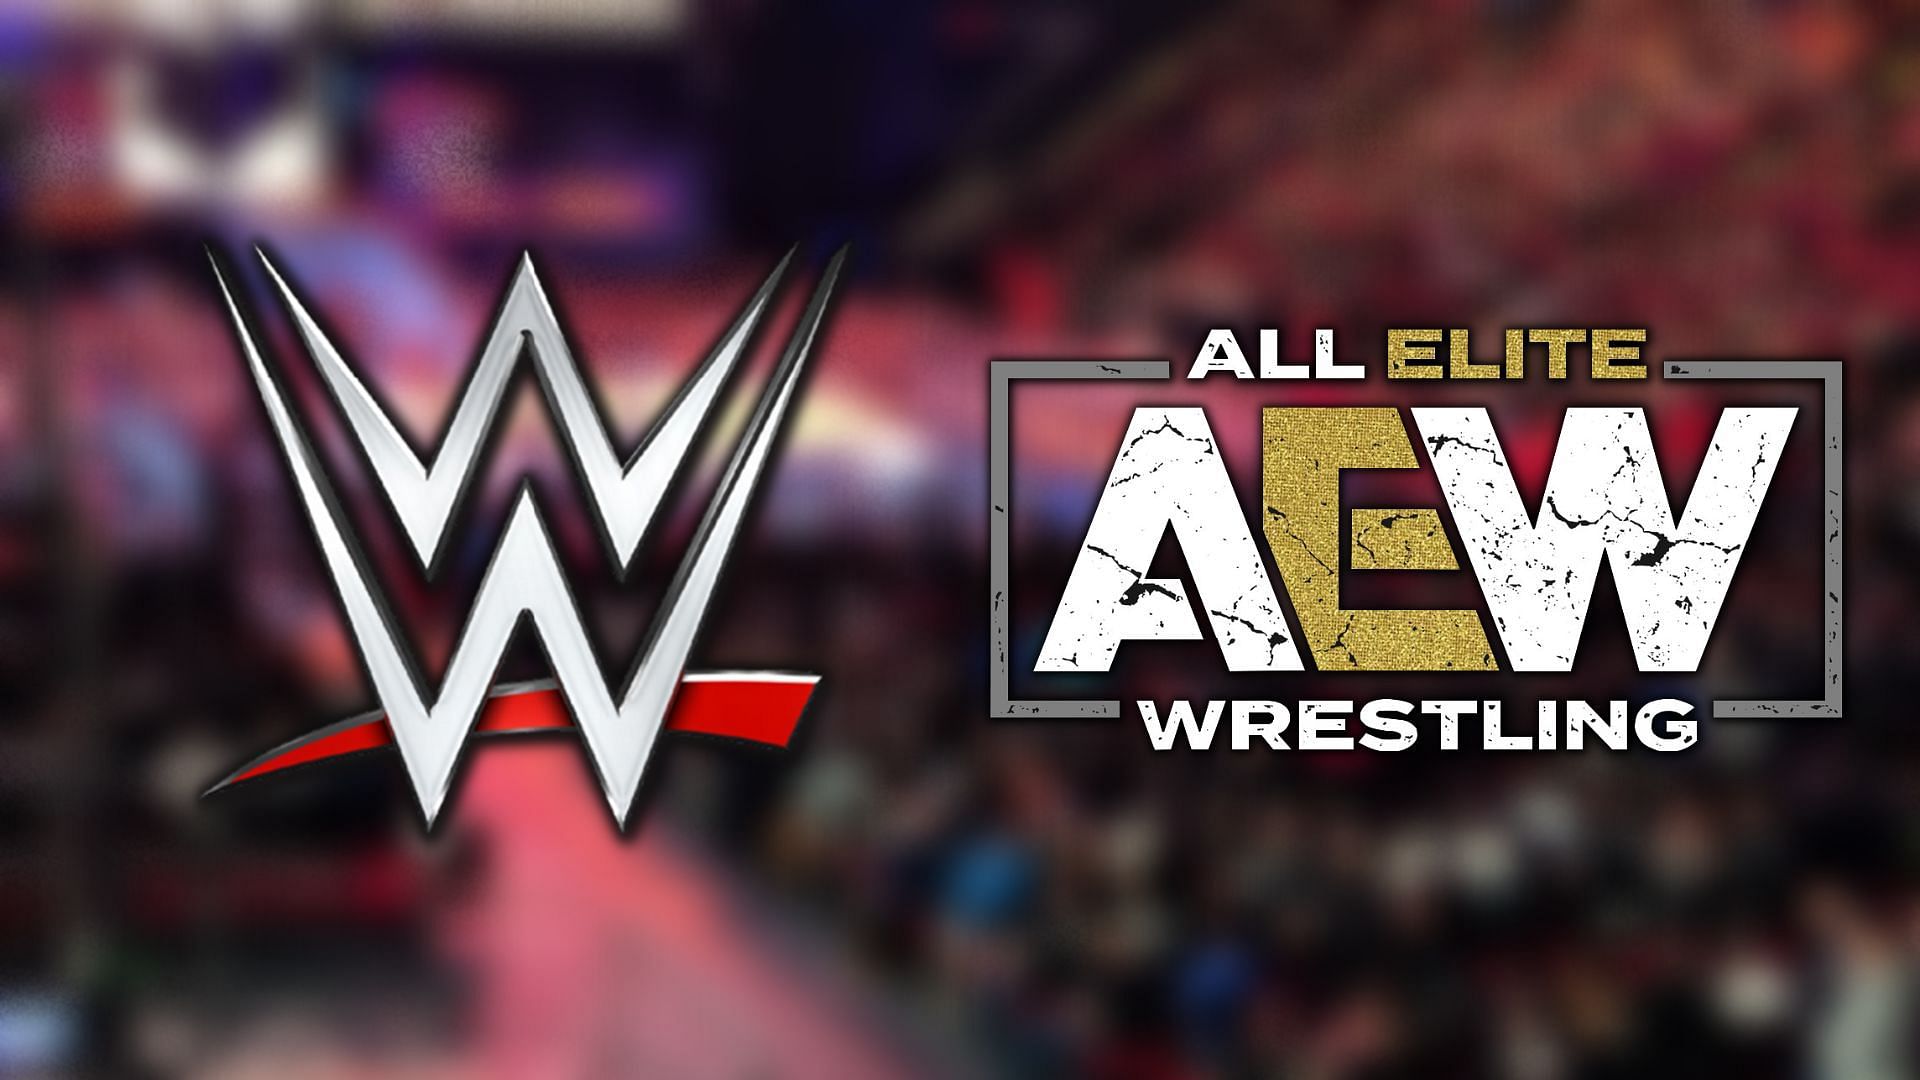 A new faction name has been revealed in AEW